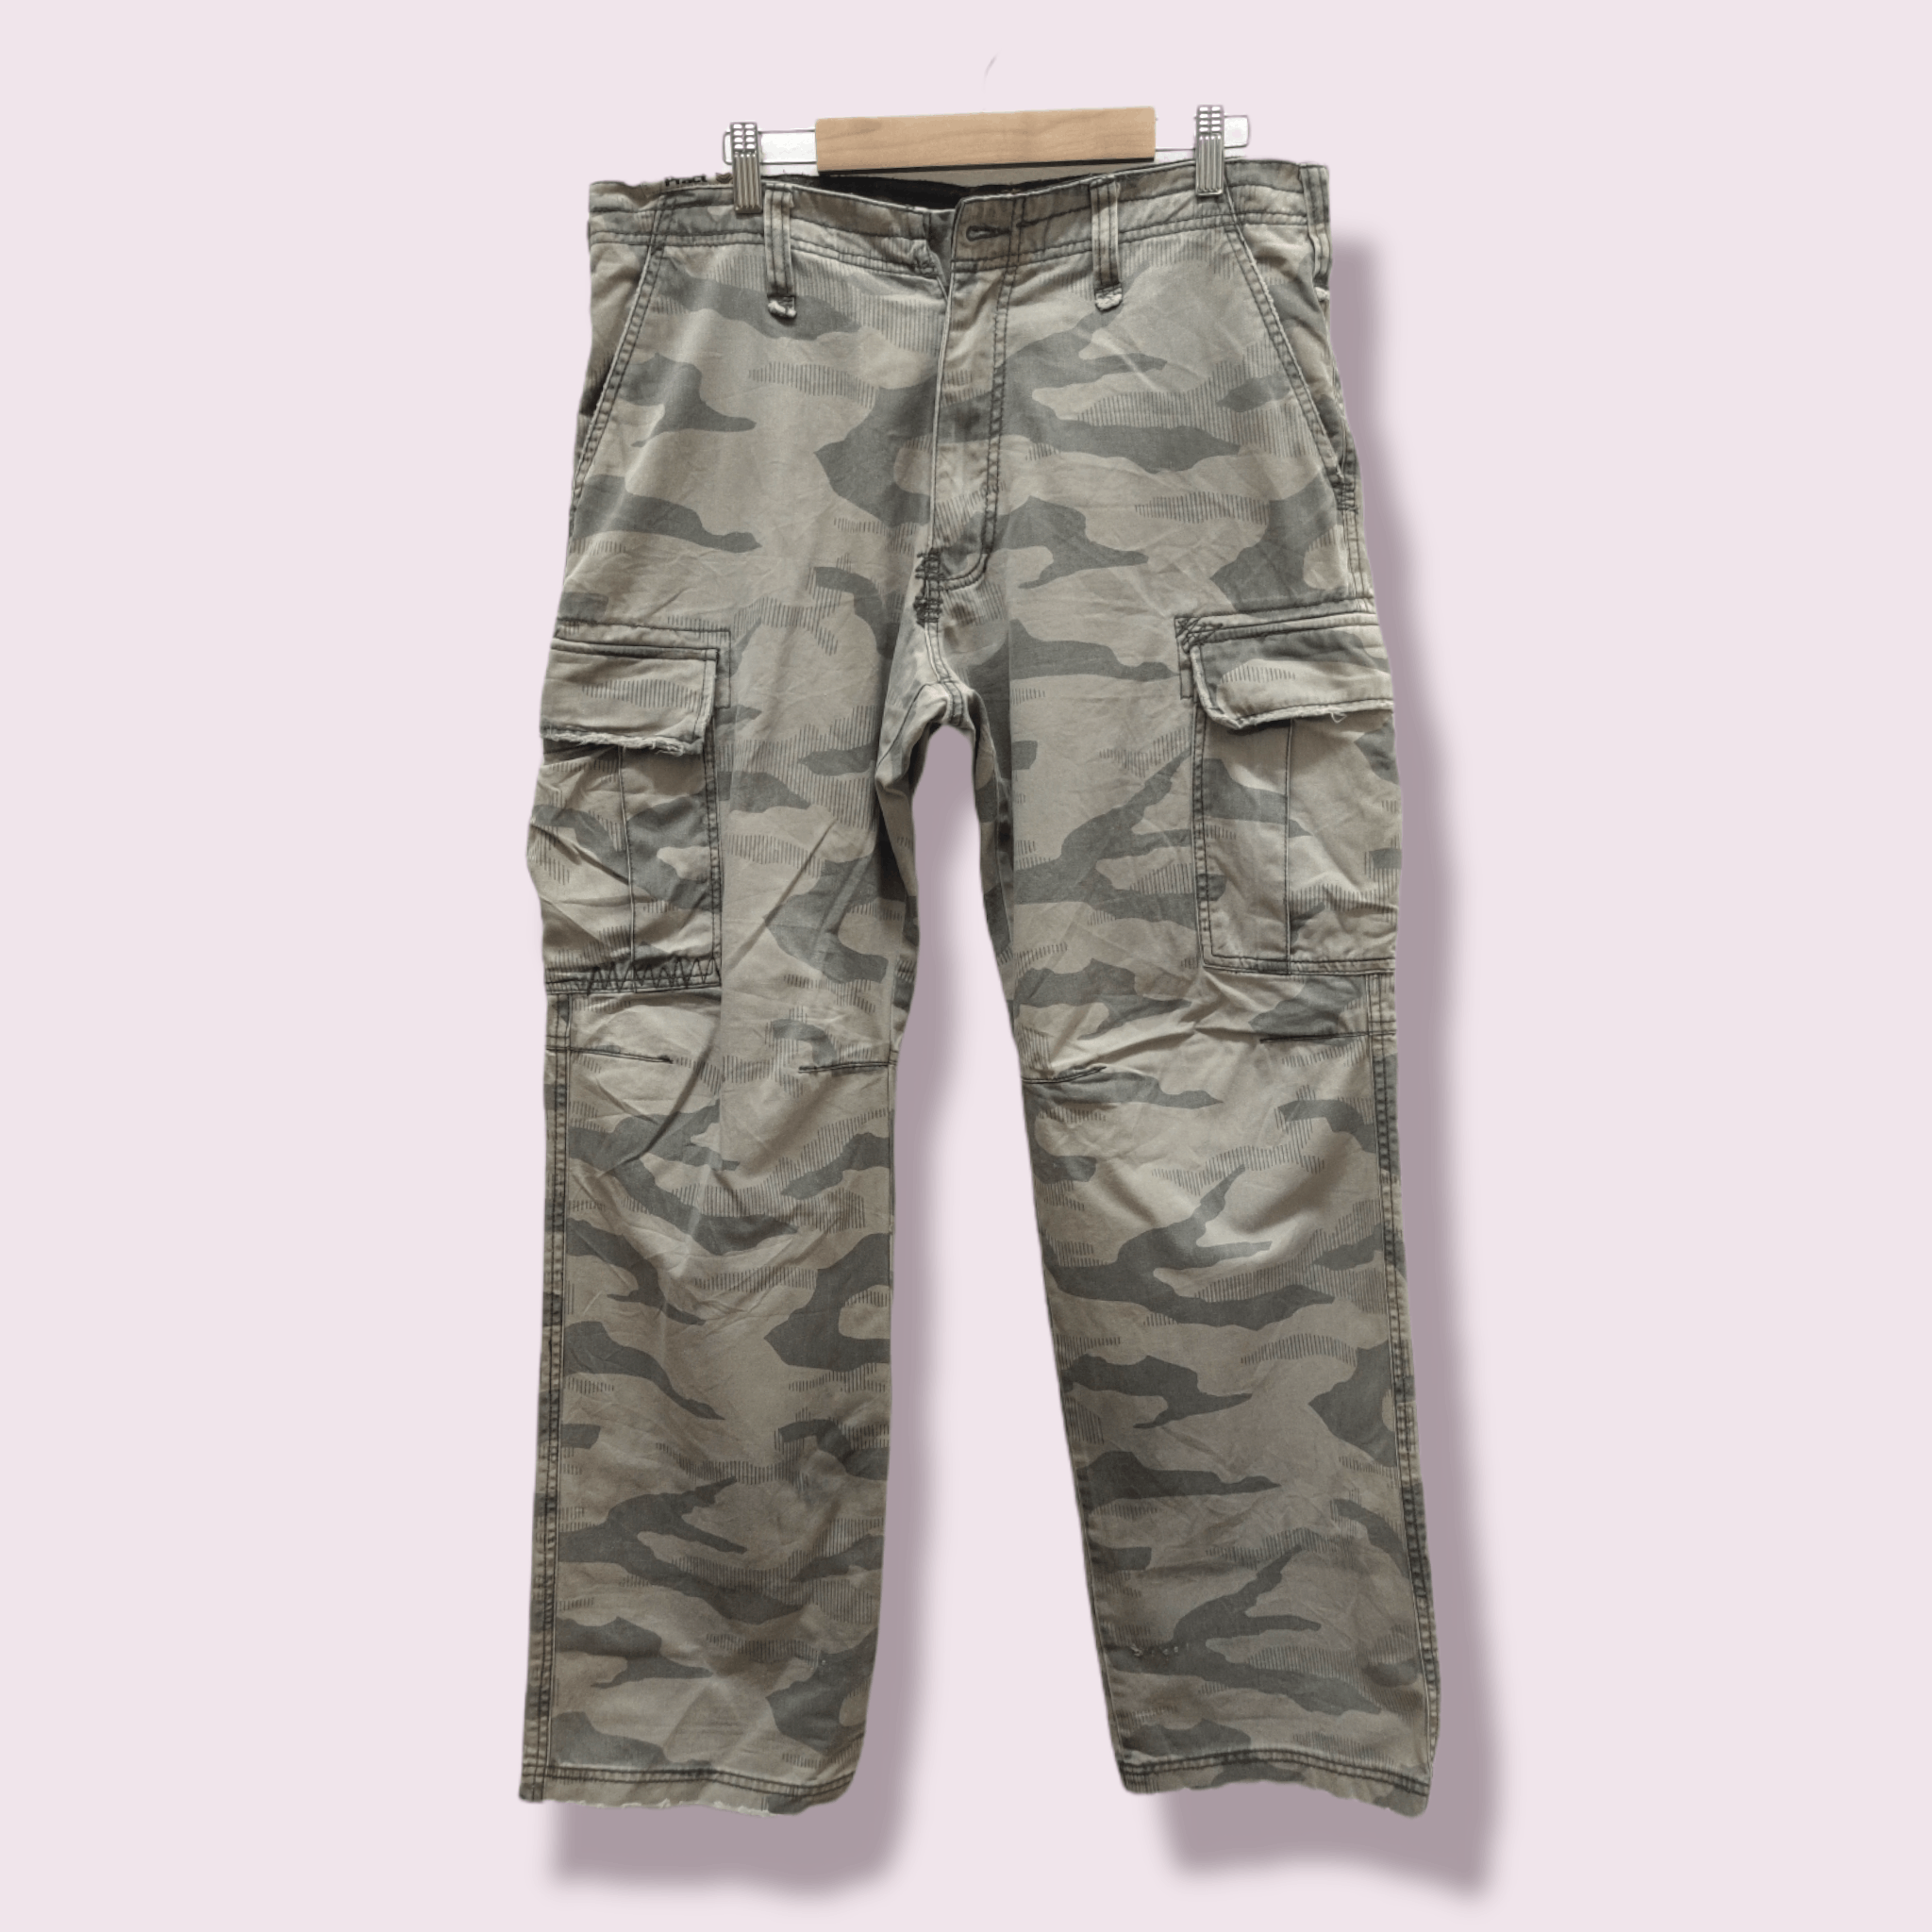 Japanese Brand PRACT ARMY CARGO PANTS | Grailed